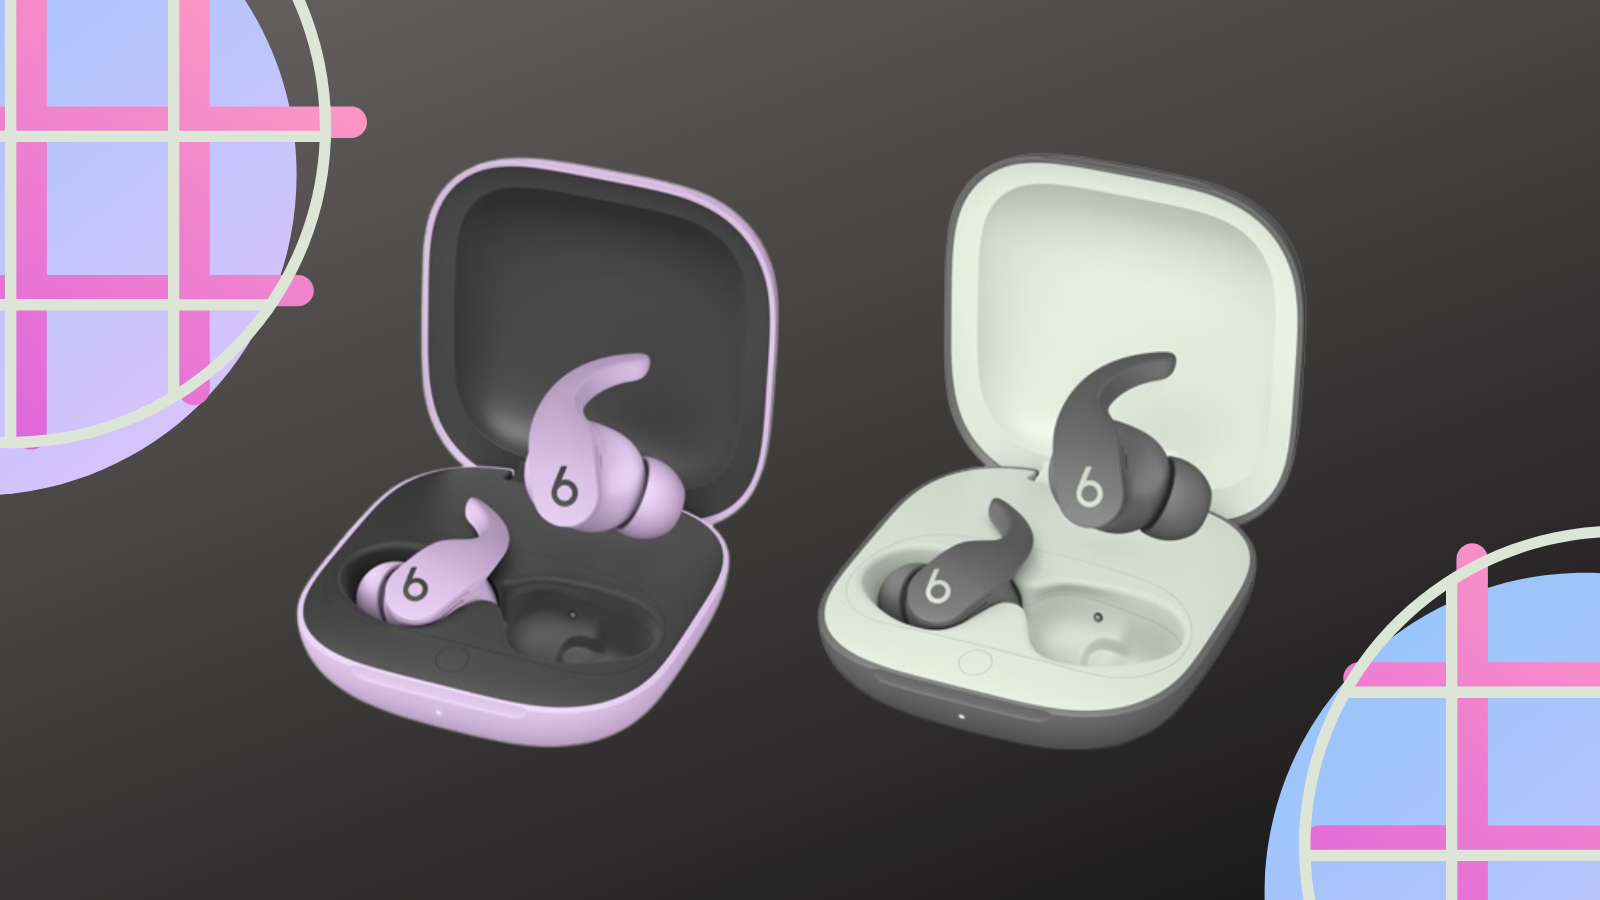 Beats Fit Pro wireless earbuds in two color variations